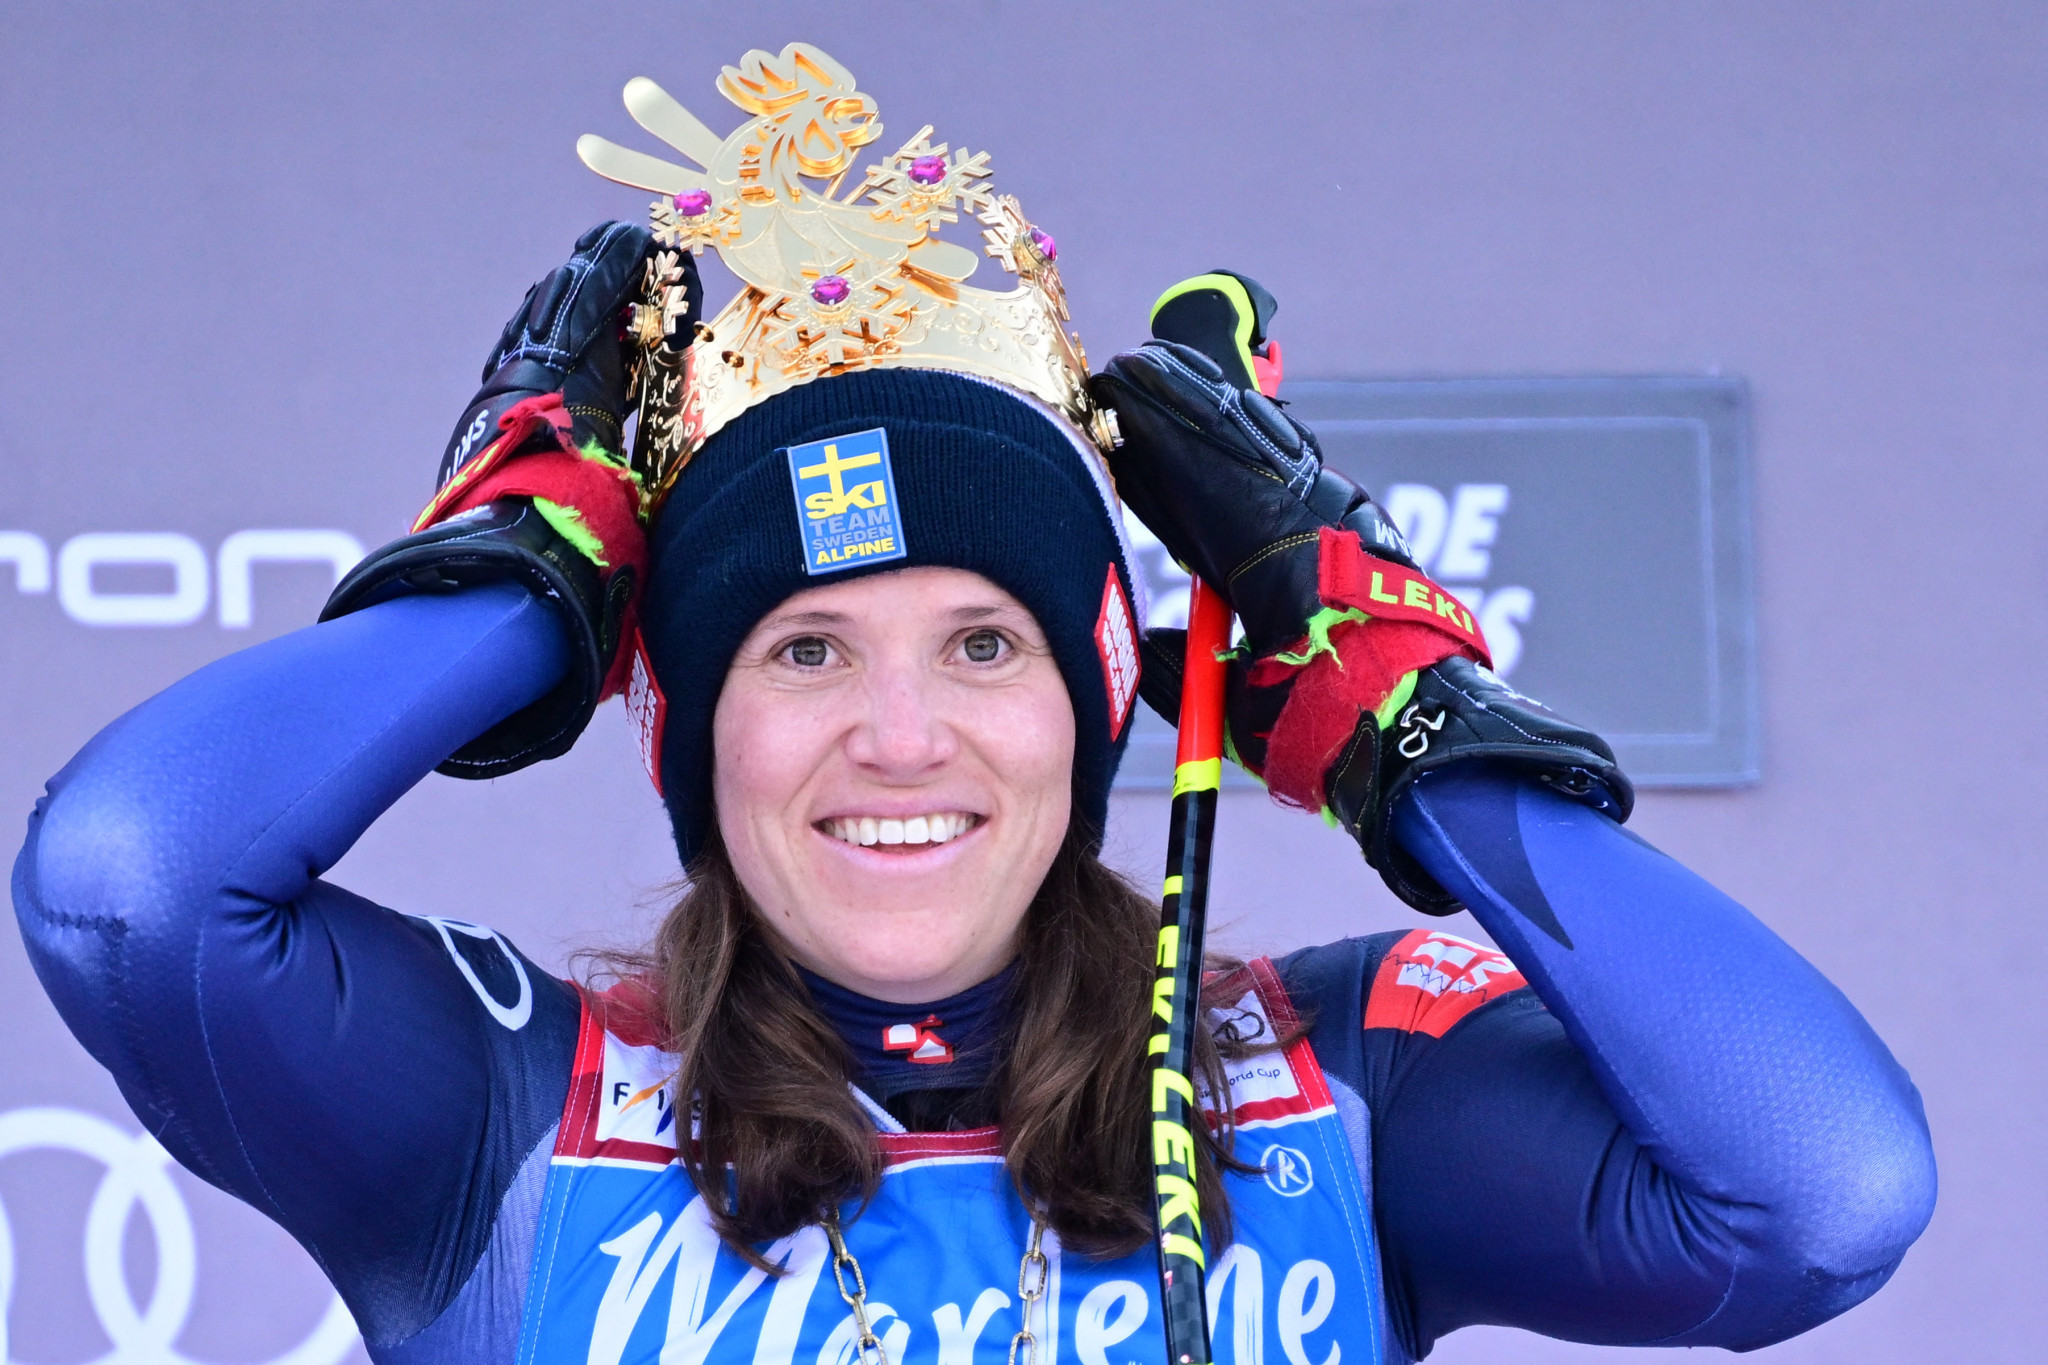 Sweden's Sara Hector extended her lead in the FIS Alpine Ski World Cup giant slalom standings in Kronplatz ©Getty Images